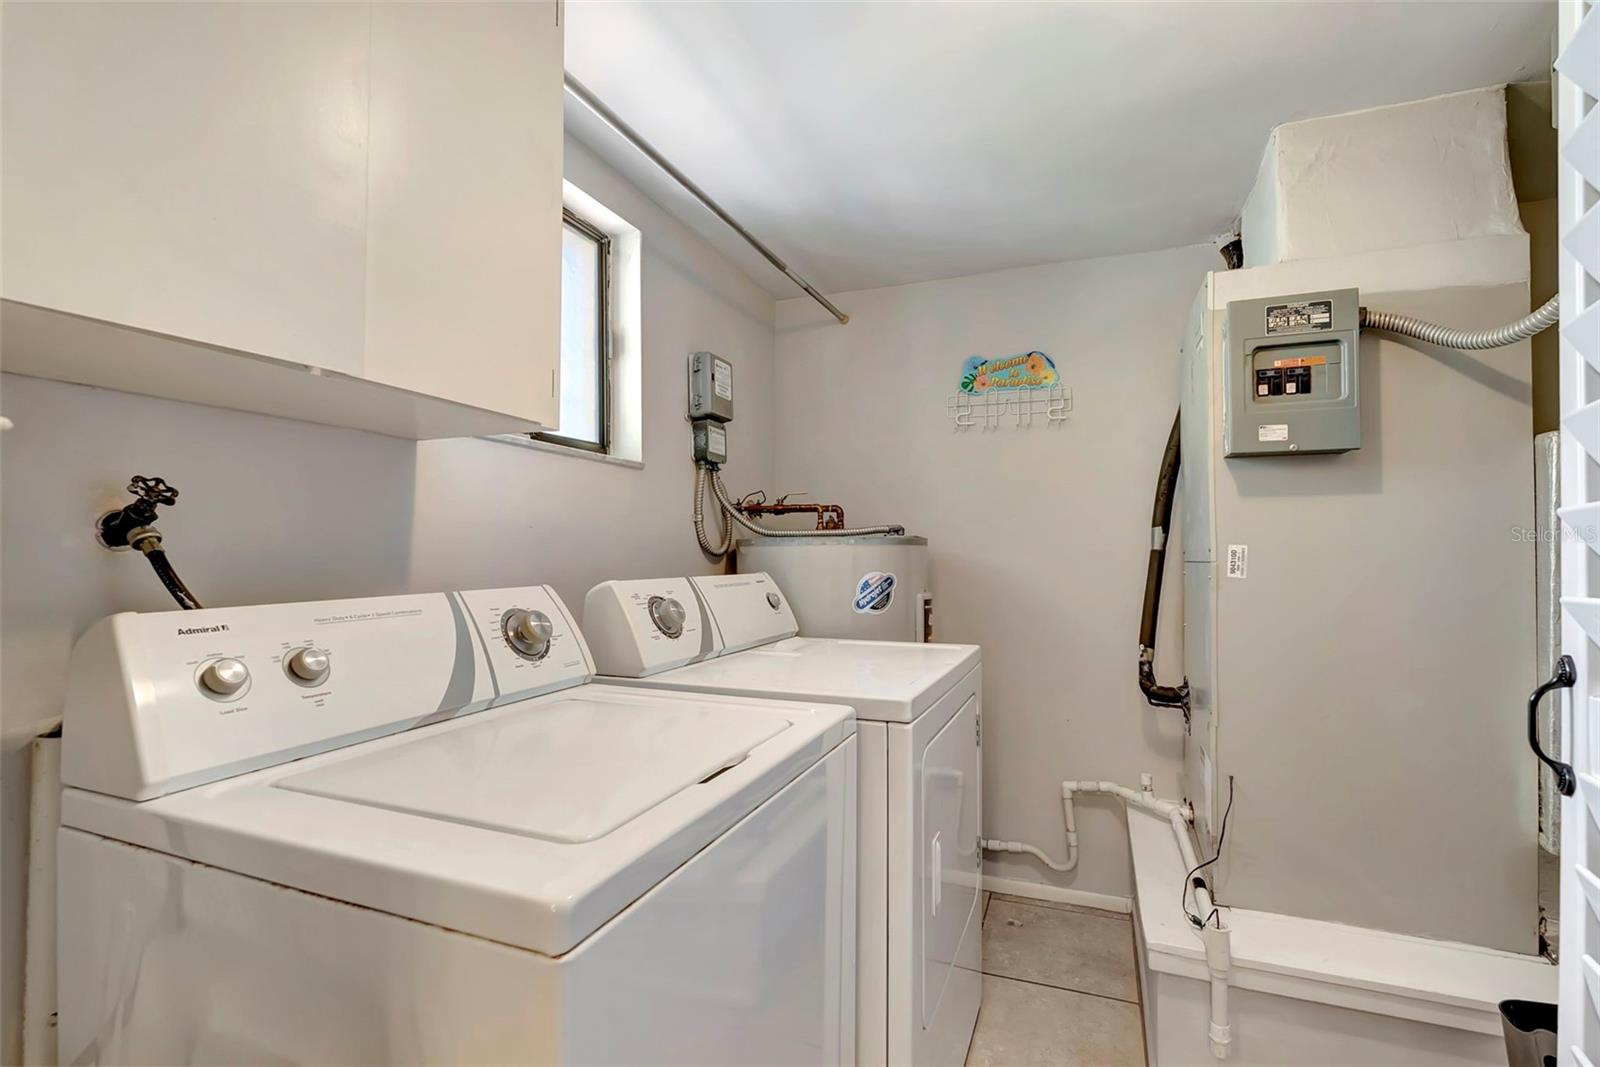 The laundry has built in cabinets and houses your AC and water heater.